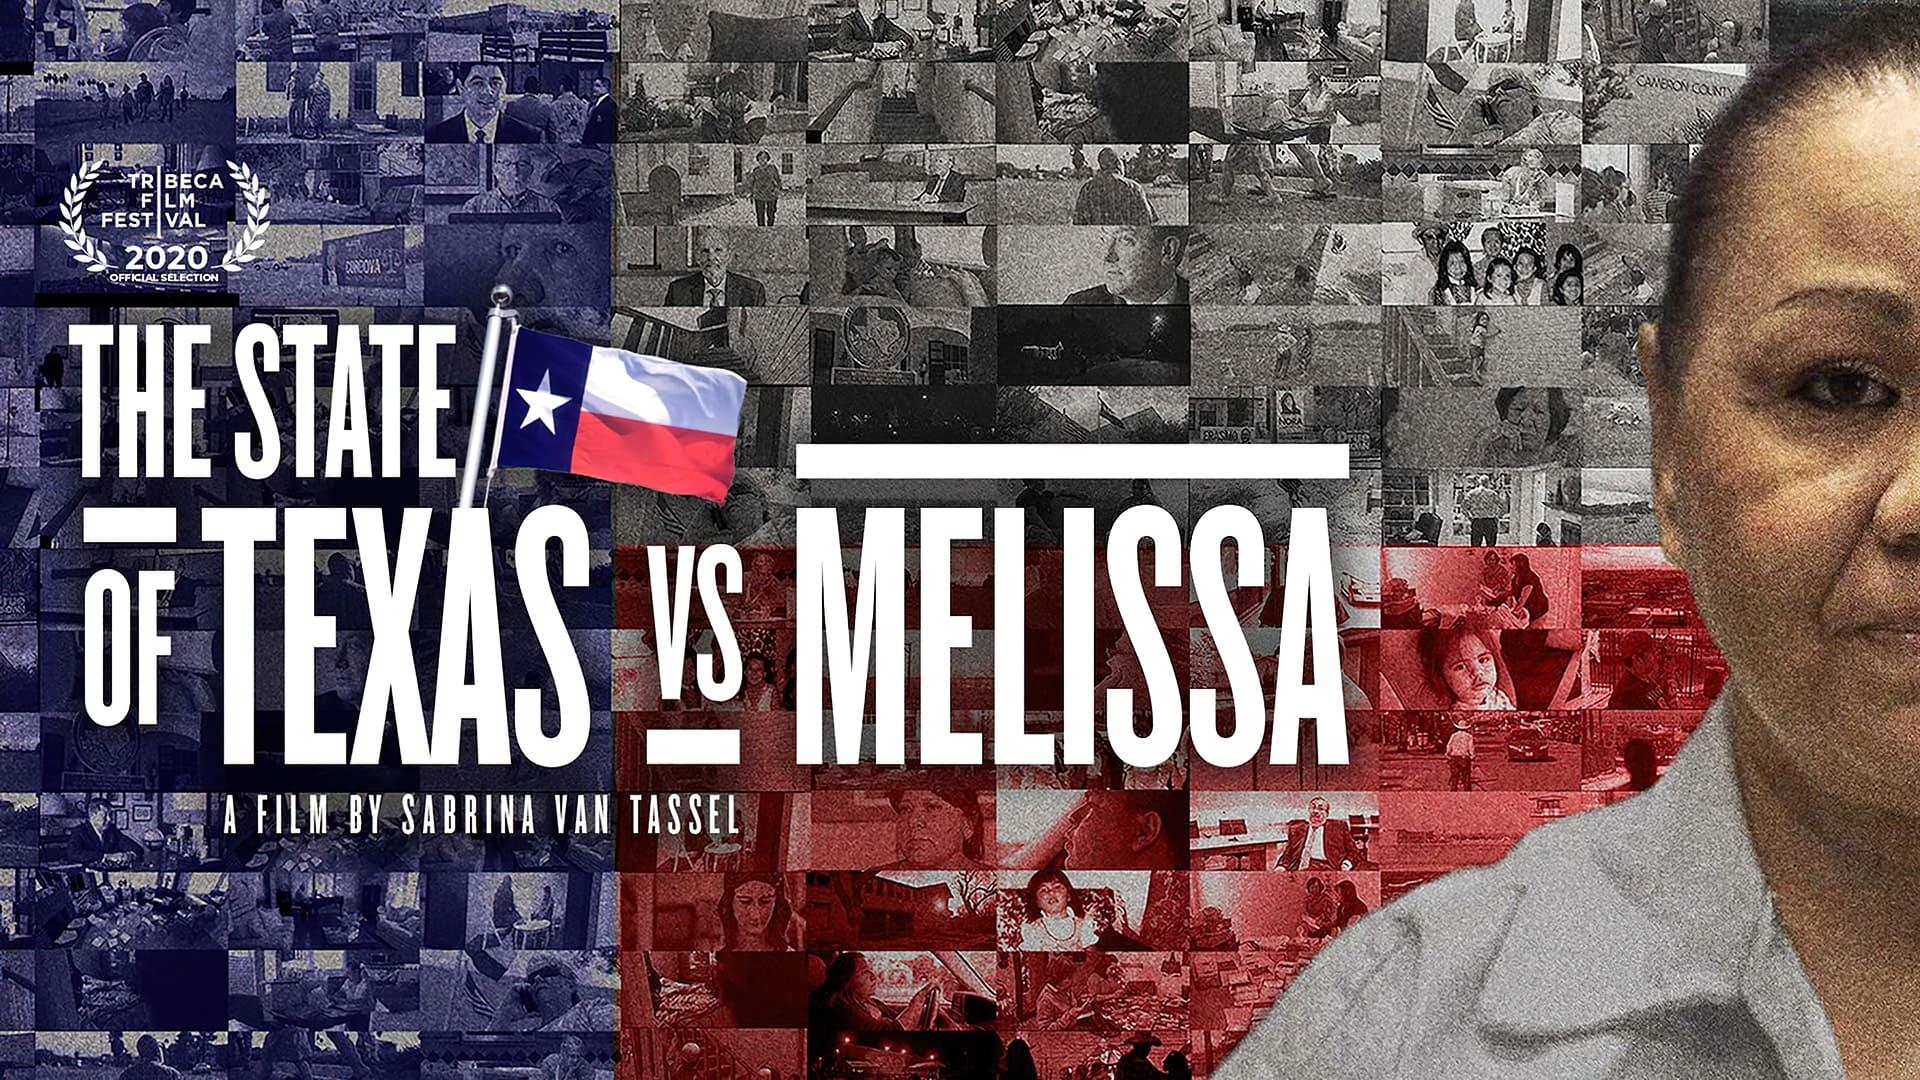 The State of Texas vs. Melissa backdrop